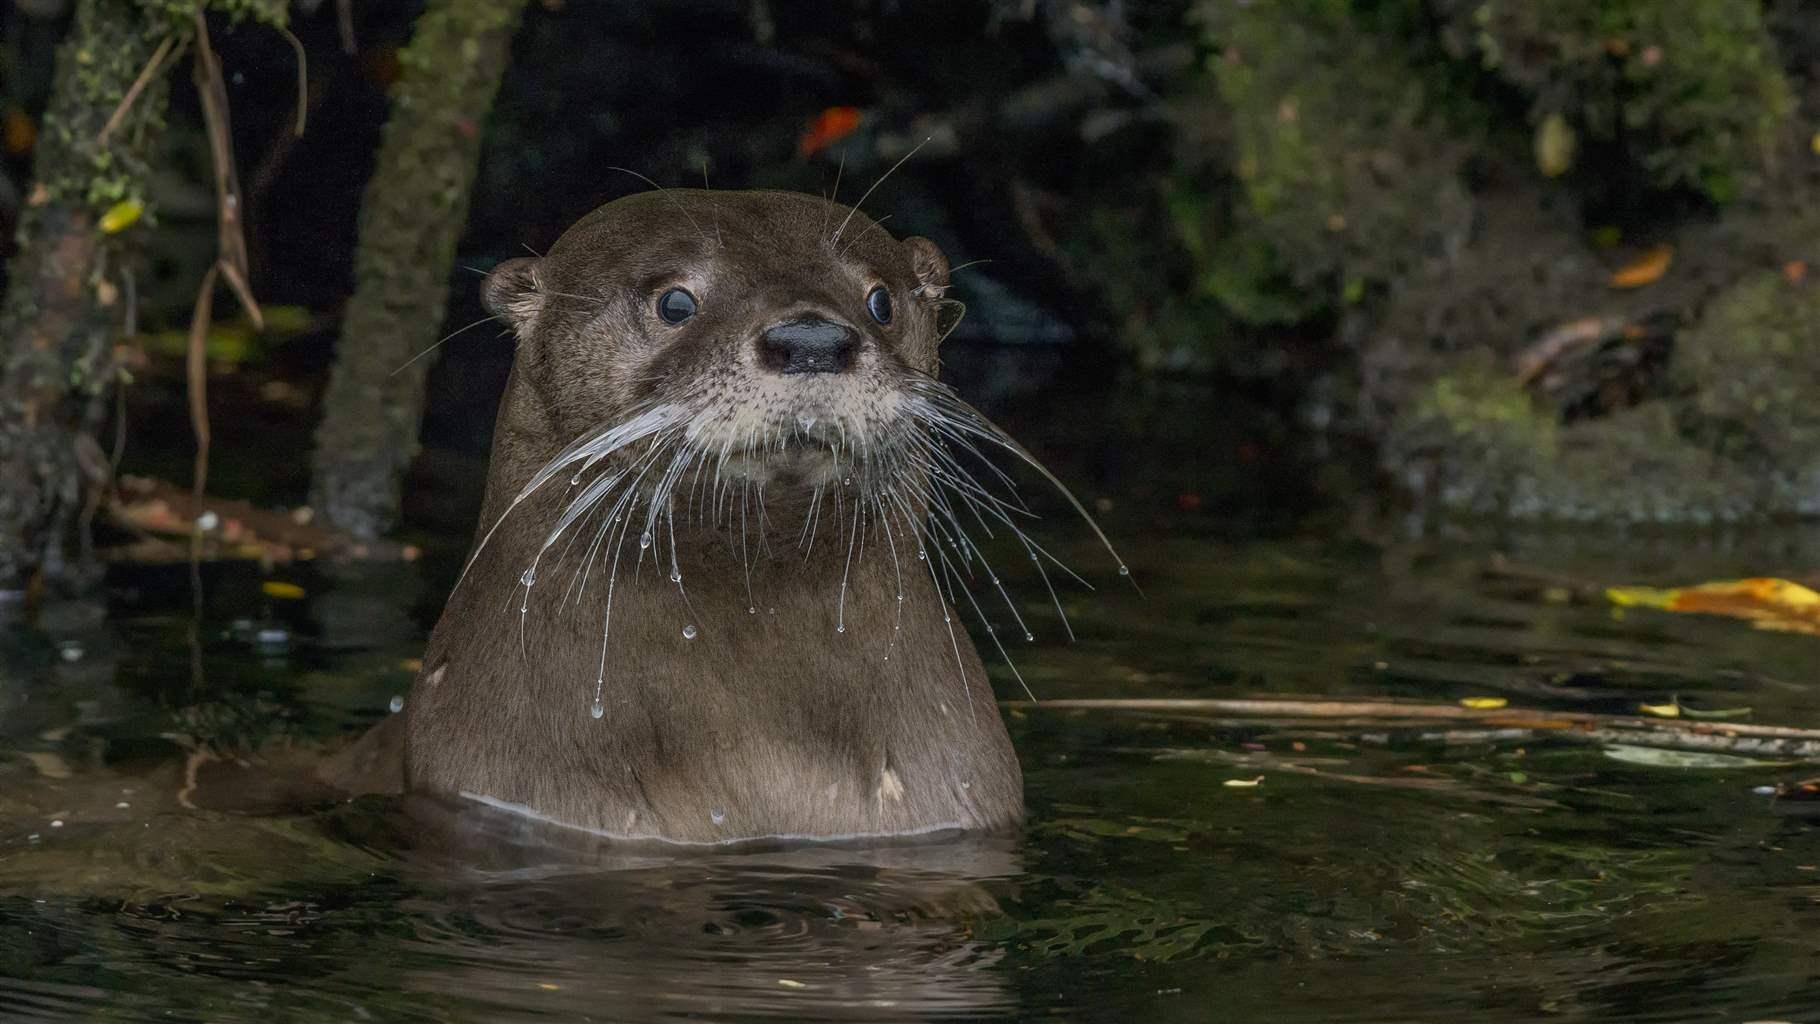 The endangered huillín, or southern river otter, nests on land and forages in both freshwater and coastal-marine areas of Chile